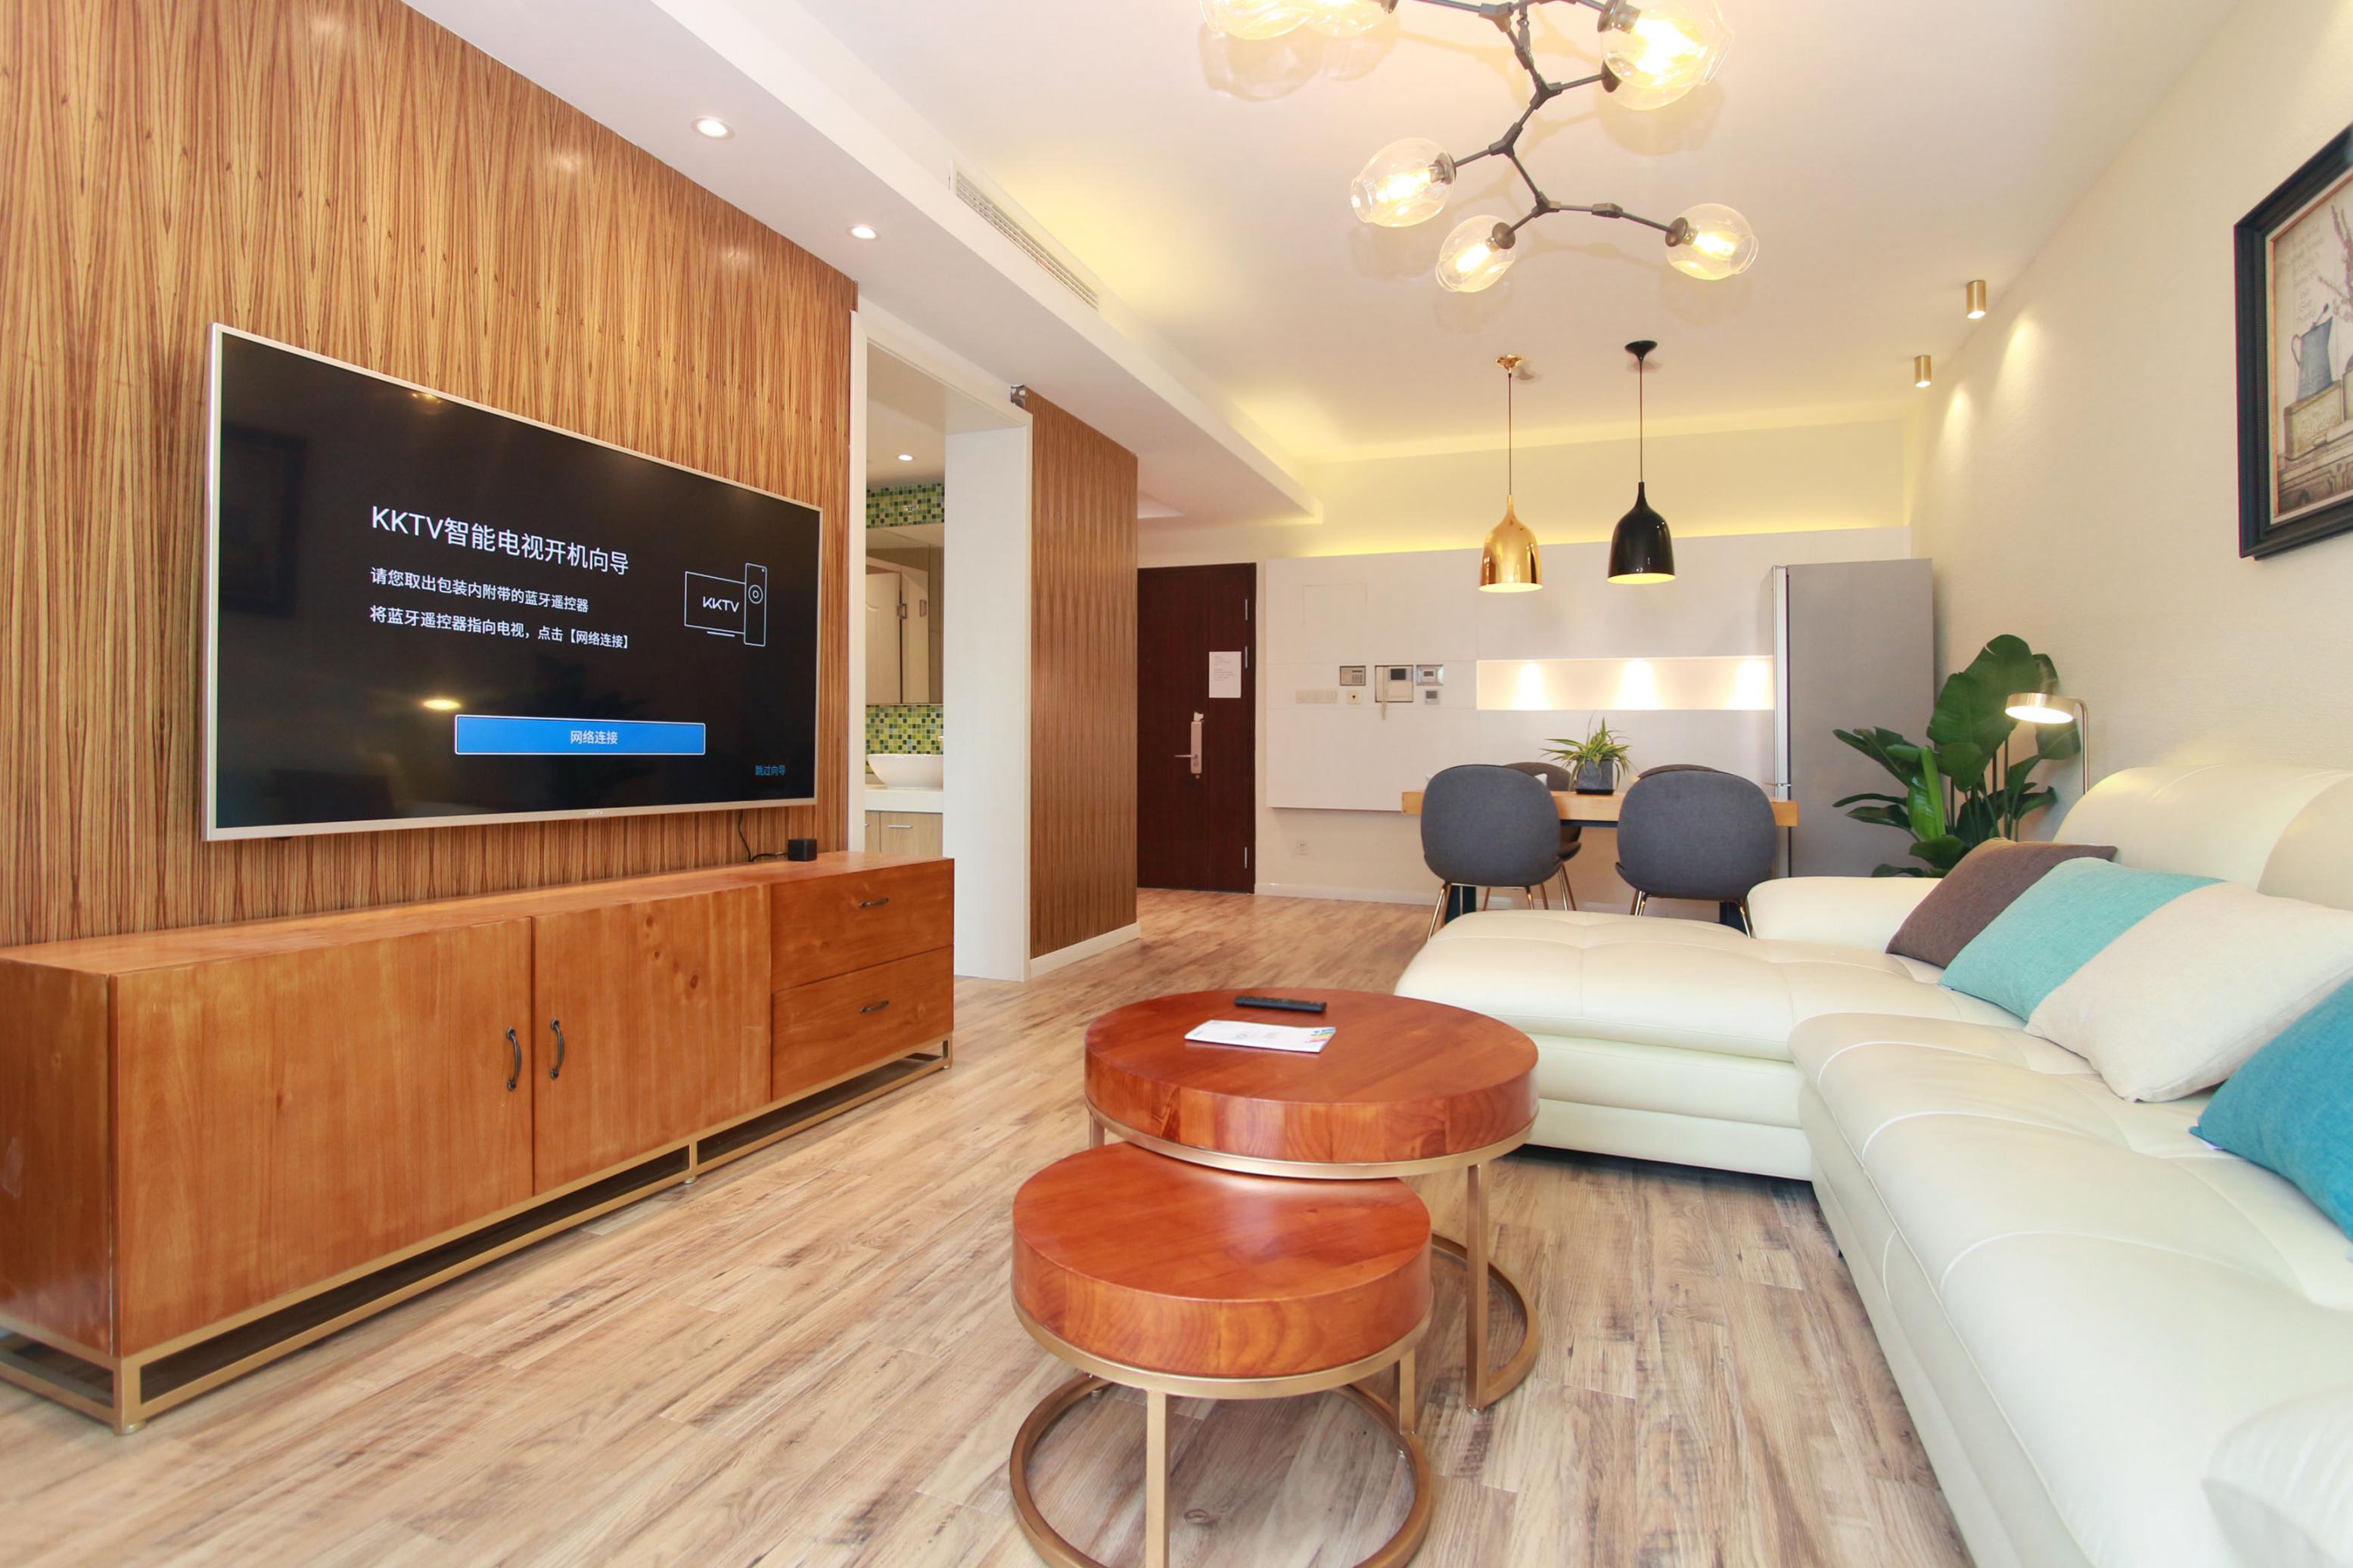 Big living room Renovated Modern High-end Ladoll 1BR Apt LN 2/12/13 for Rent in Shanghai